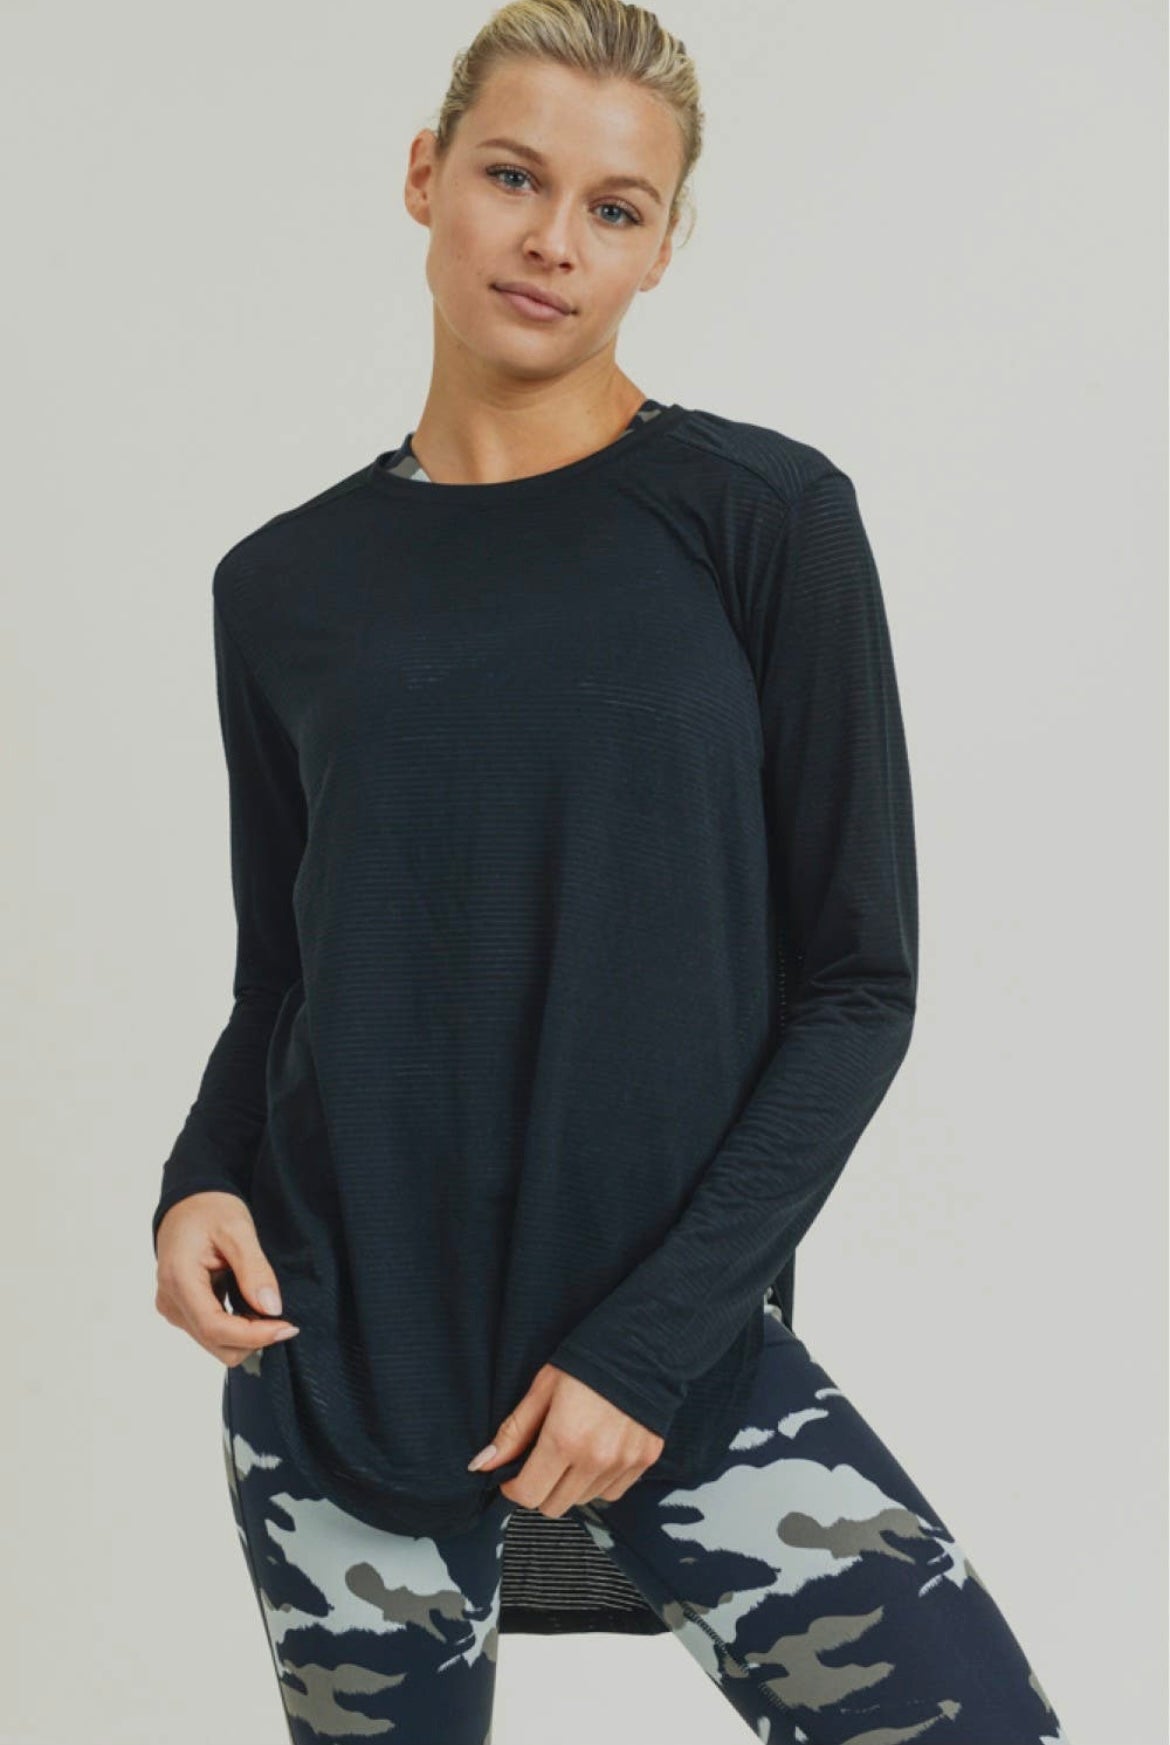 Ribbed Mesh Long Sleeve Flow Top with Side Slits (Black)